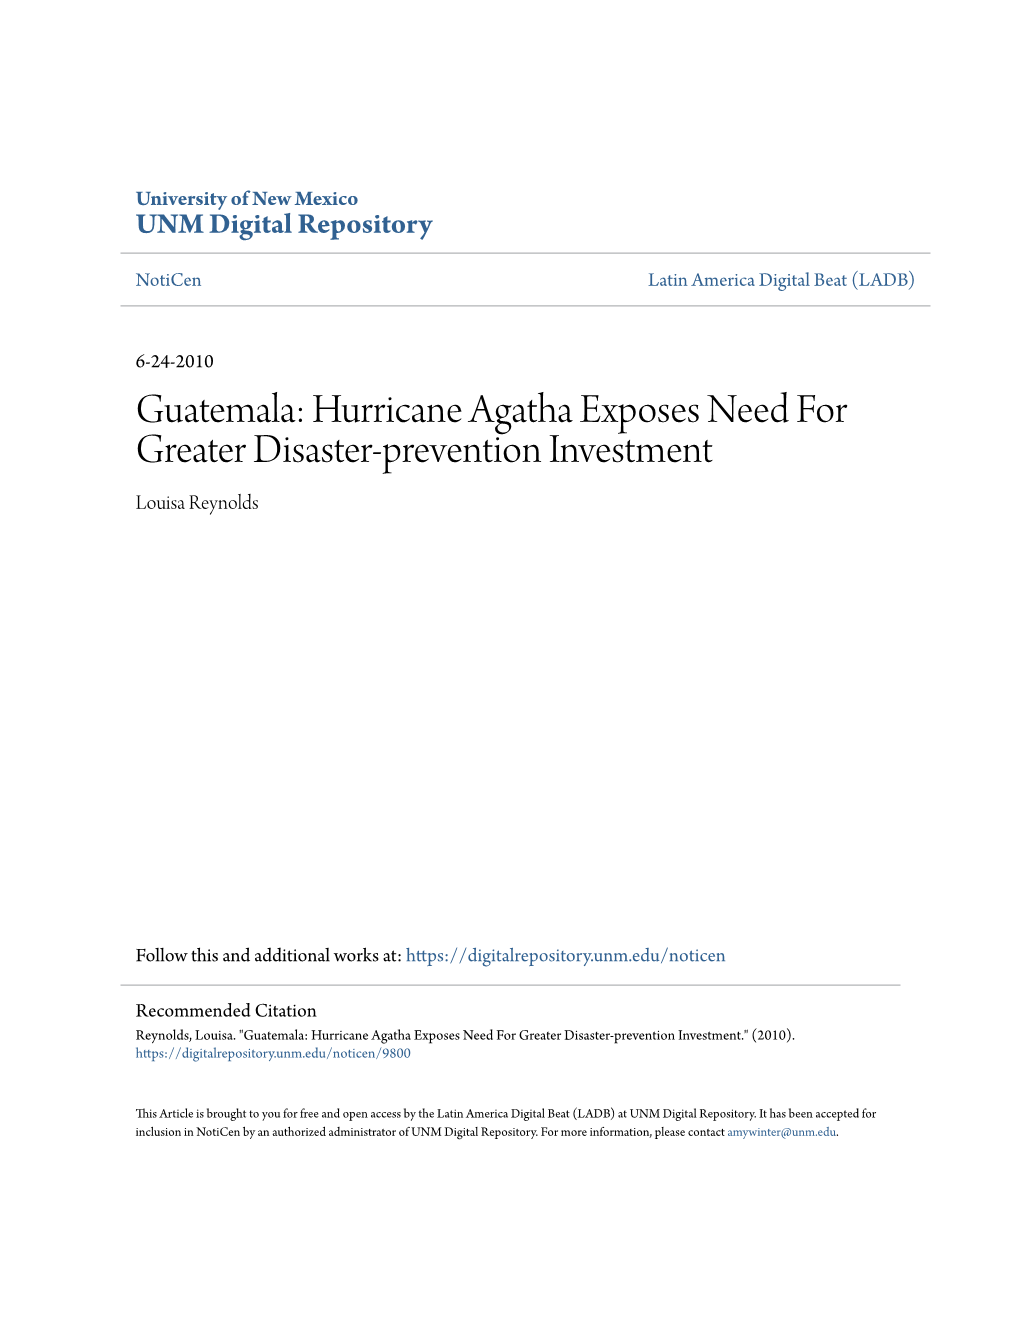 Guatemala: Hurricane Agatha Exposes Need for Greater Disaster-Prevention Investment Louisa Reynolds